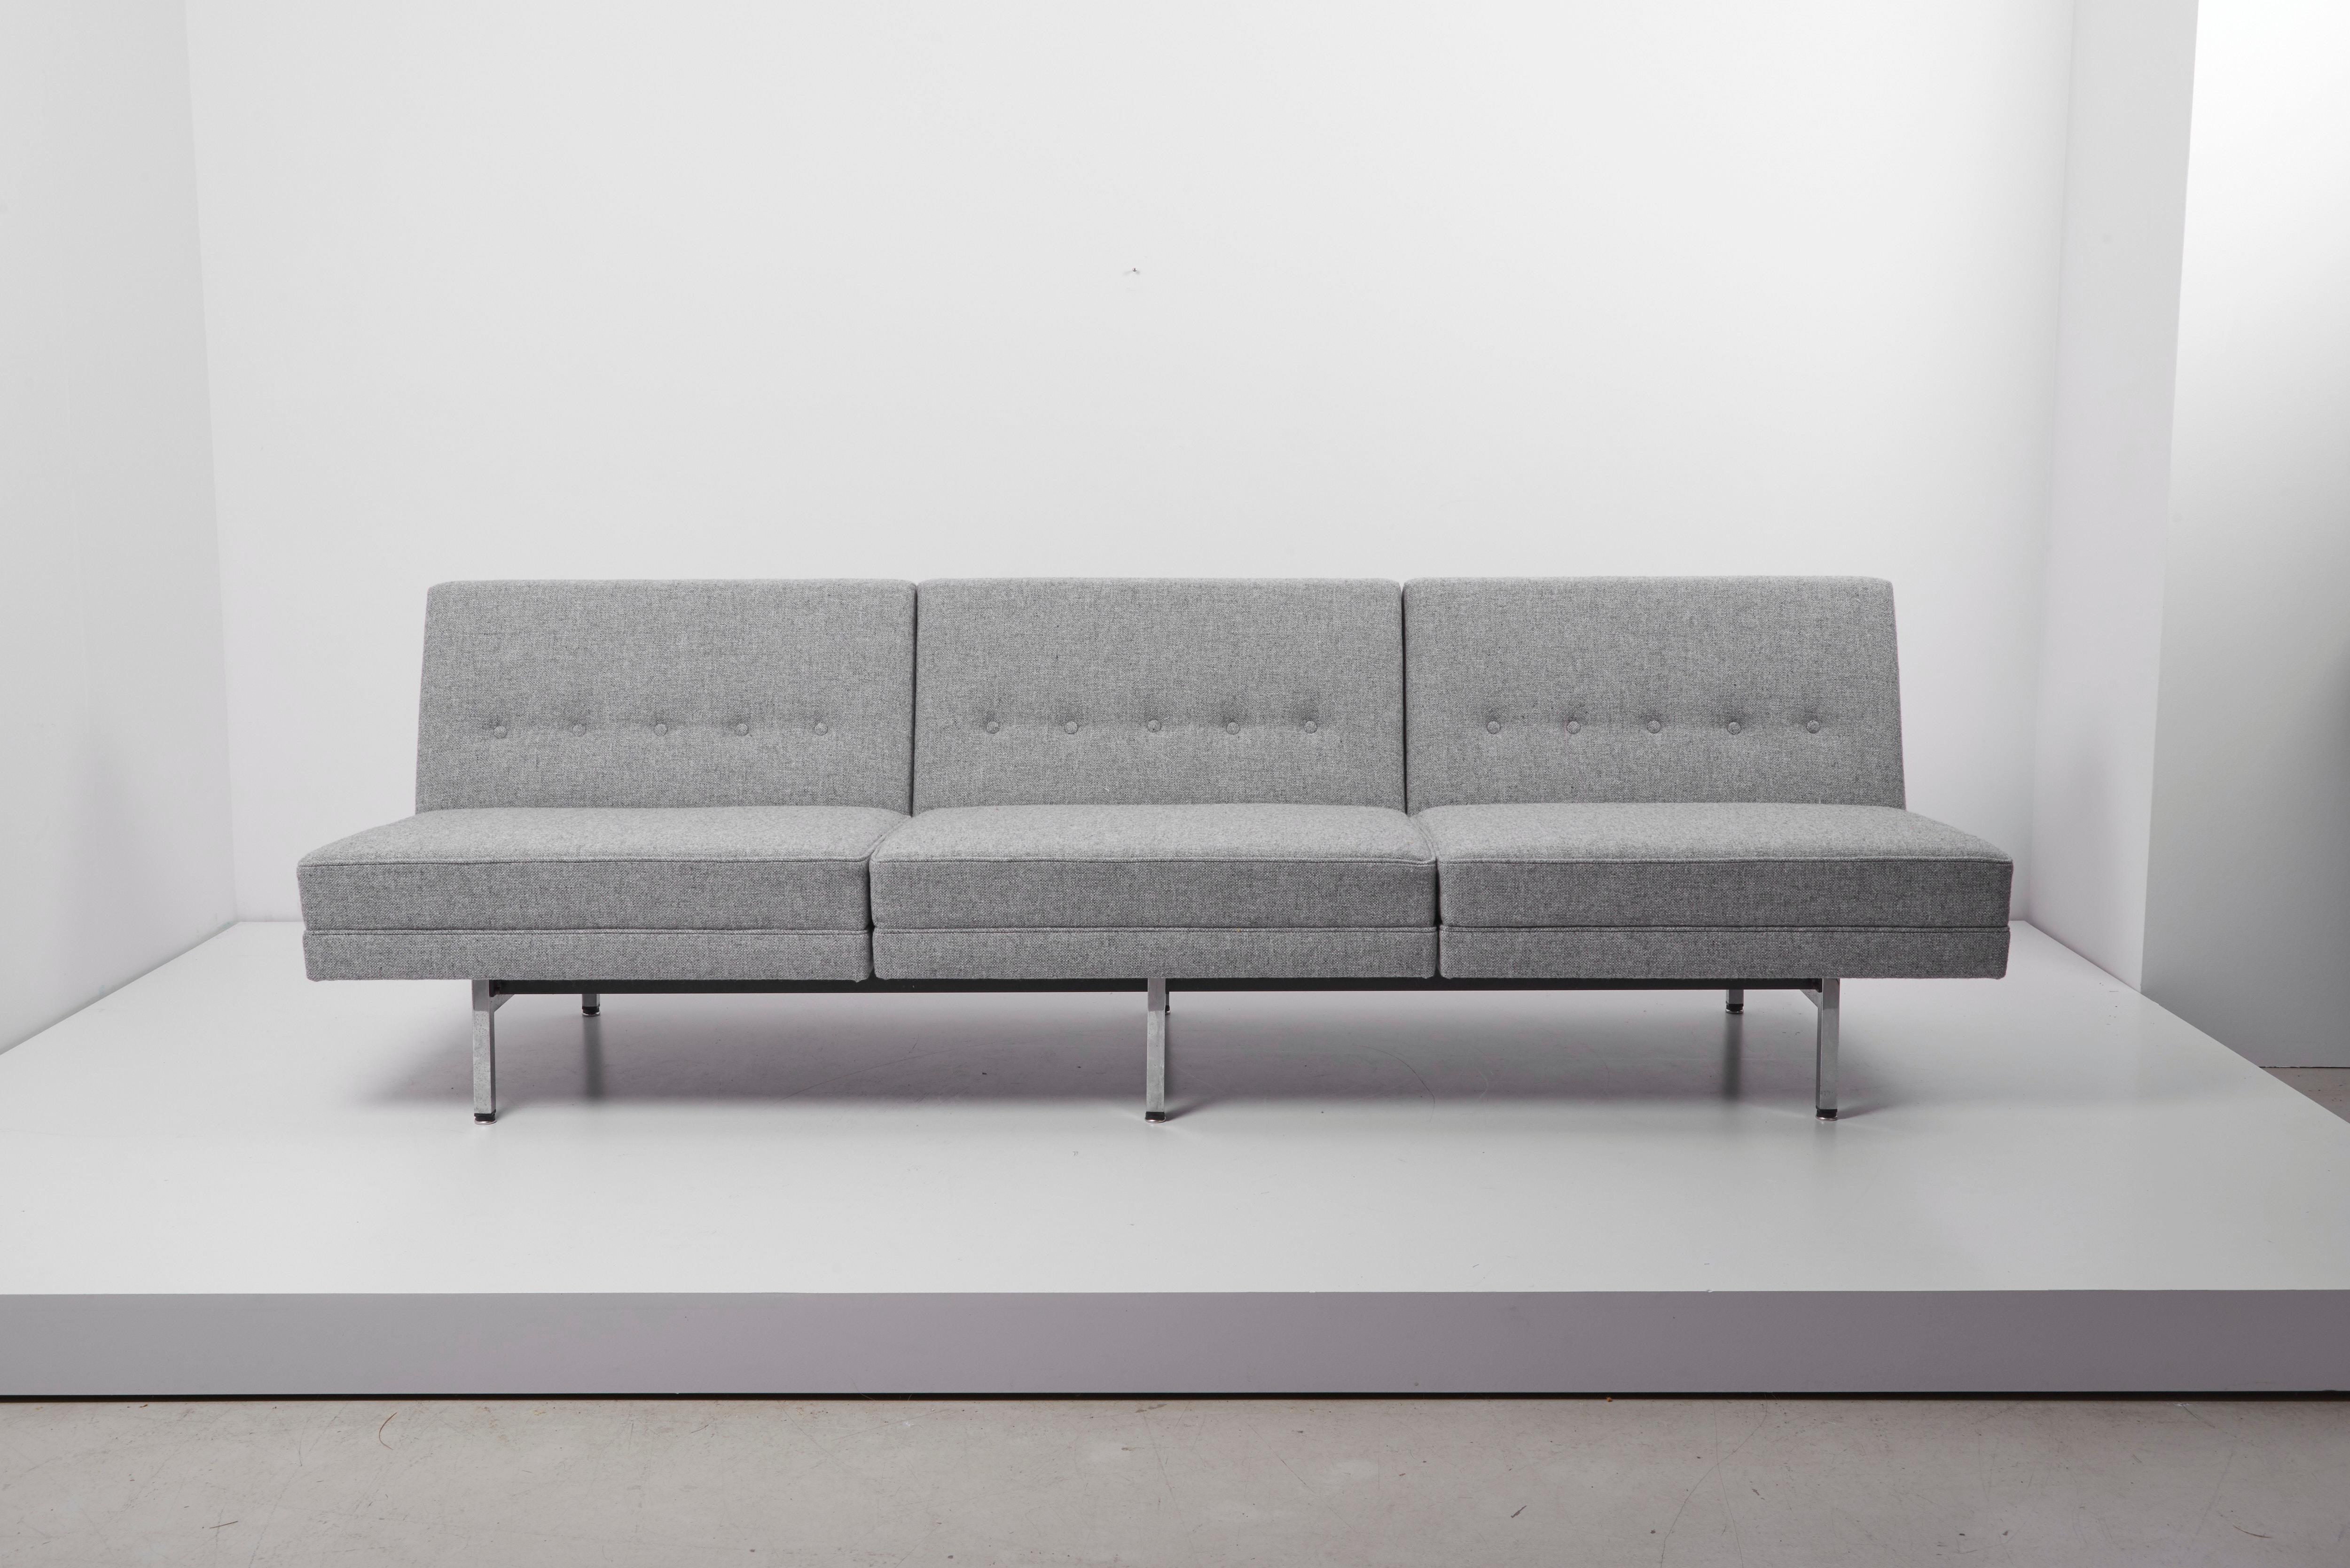 Two Modular Sofas with Table and Drawers by George Nelson for Herman Miller, US 2